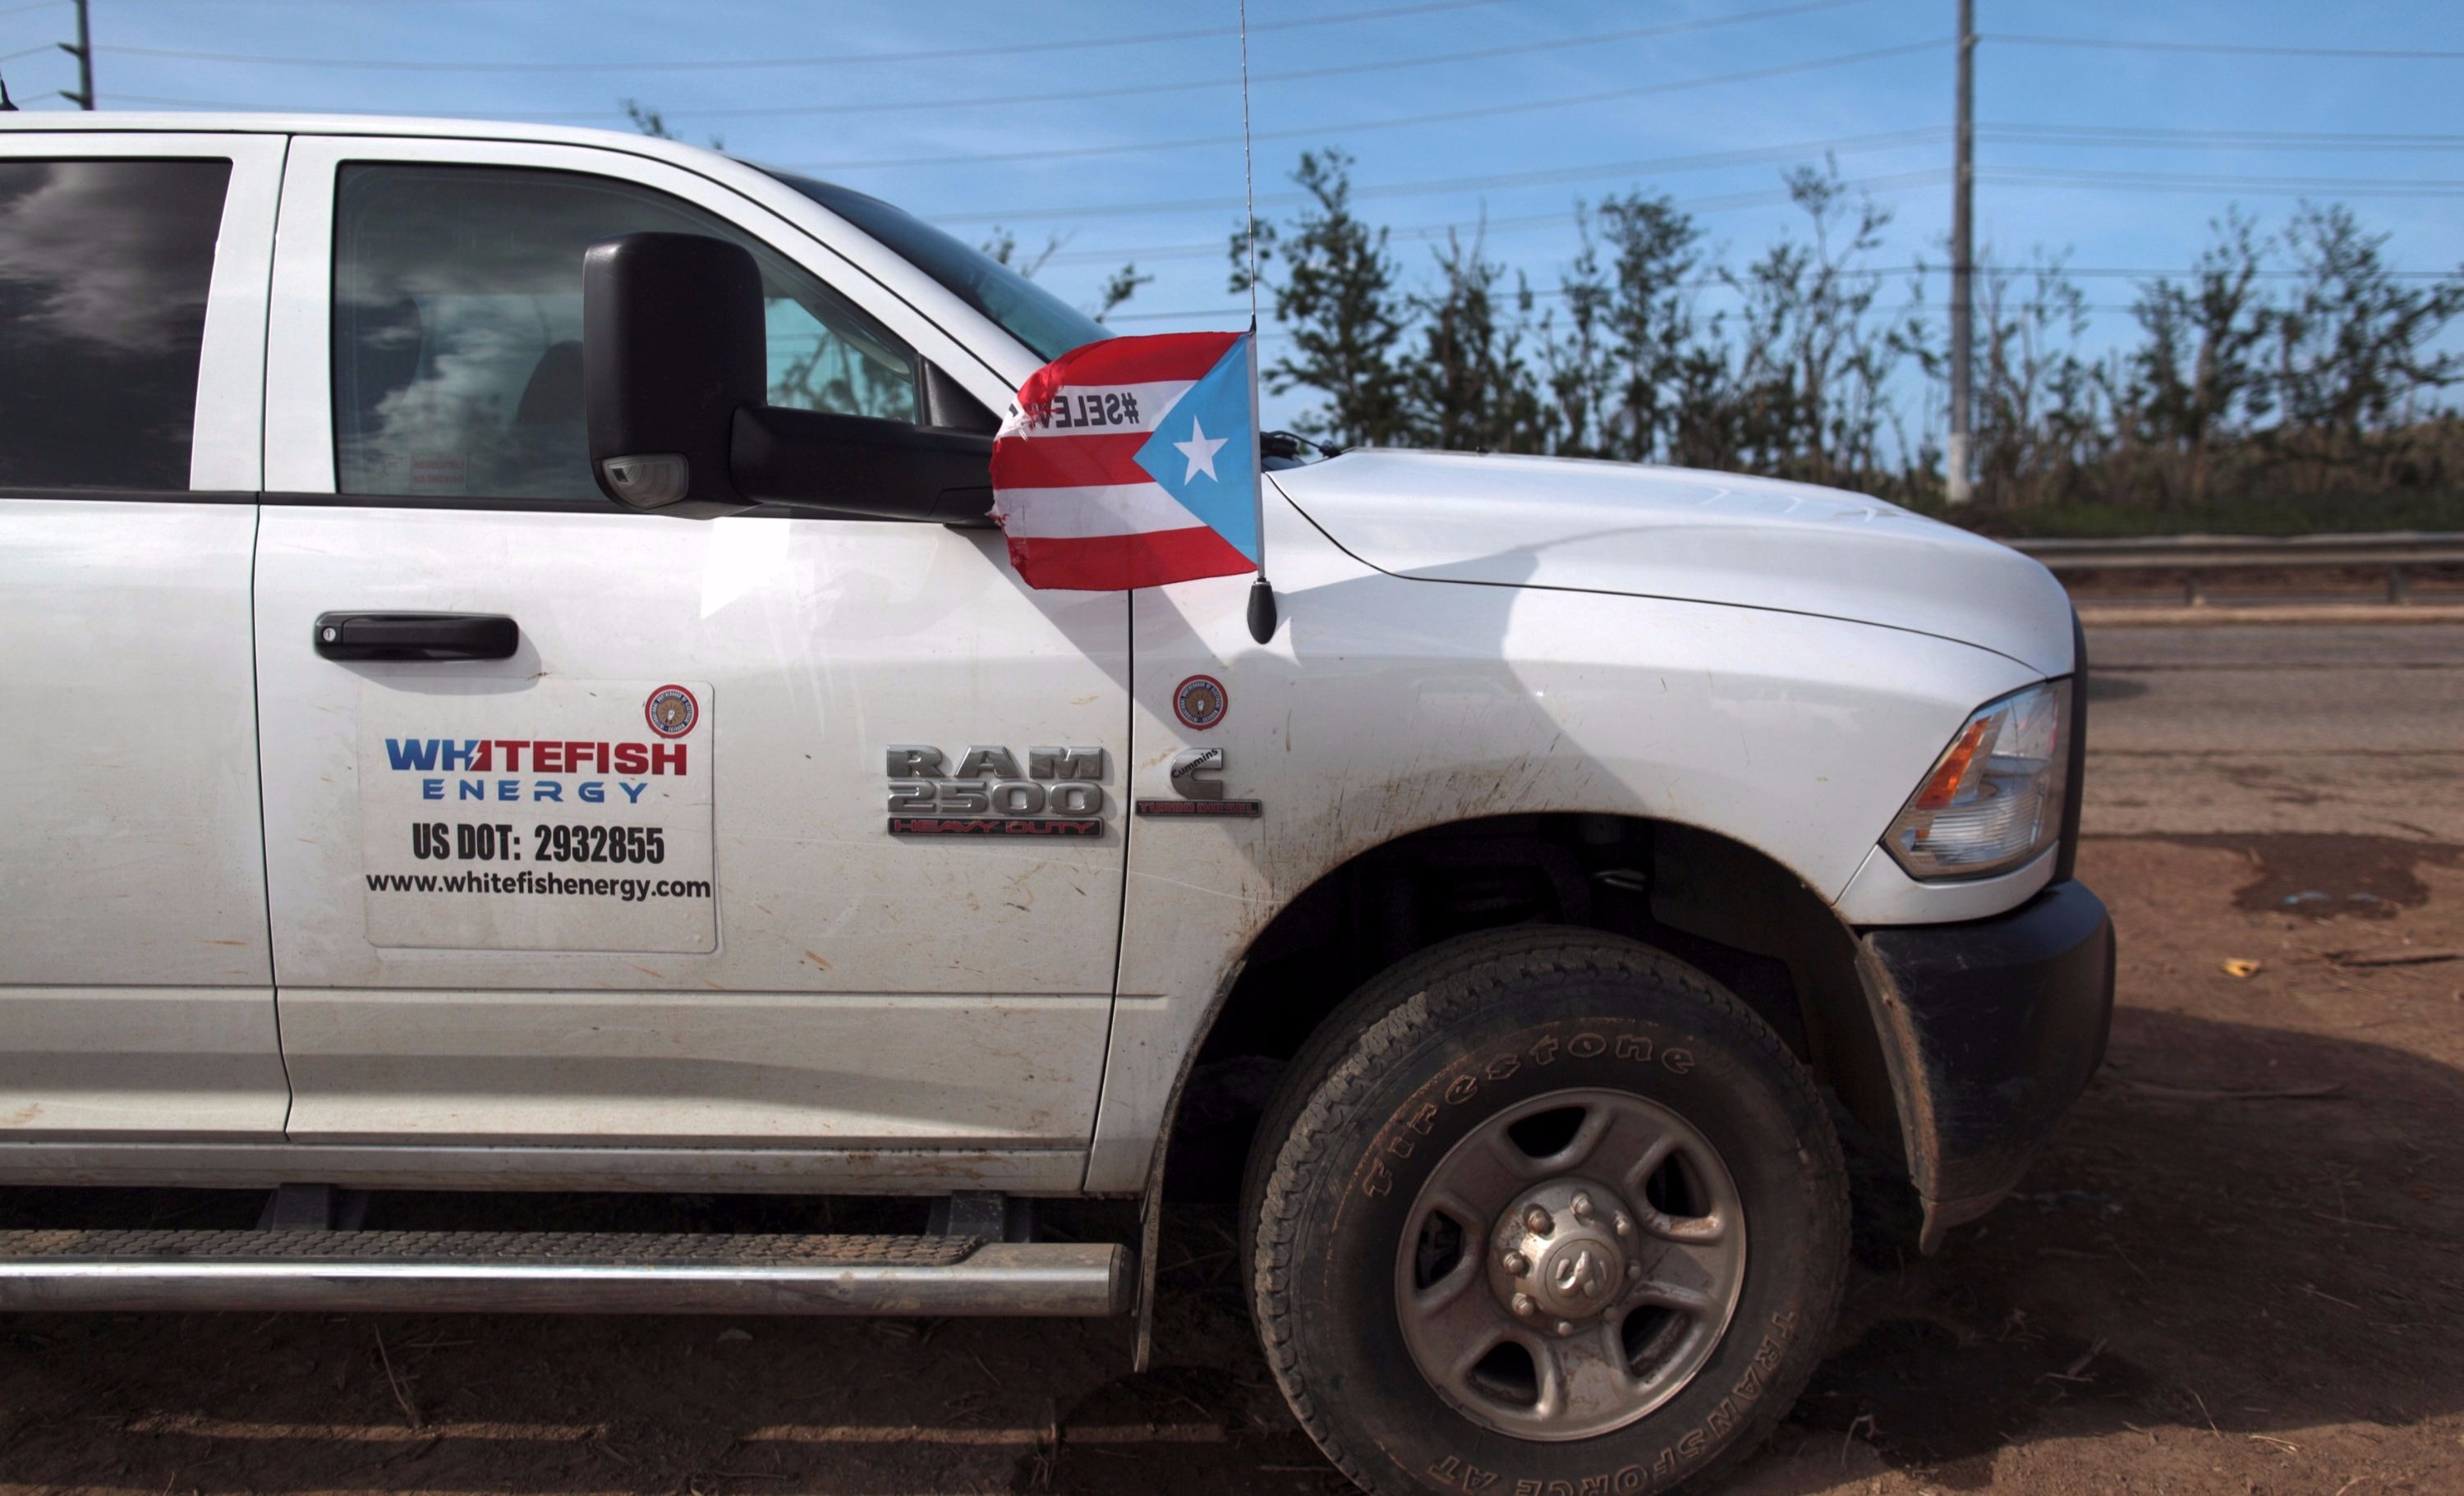 A pickup truck from Montana-based Whitefish Energy Holdings is parked in Manati, Puerto Rico Oct. 25, 2017.